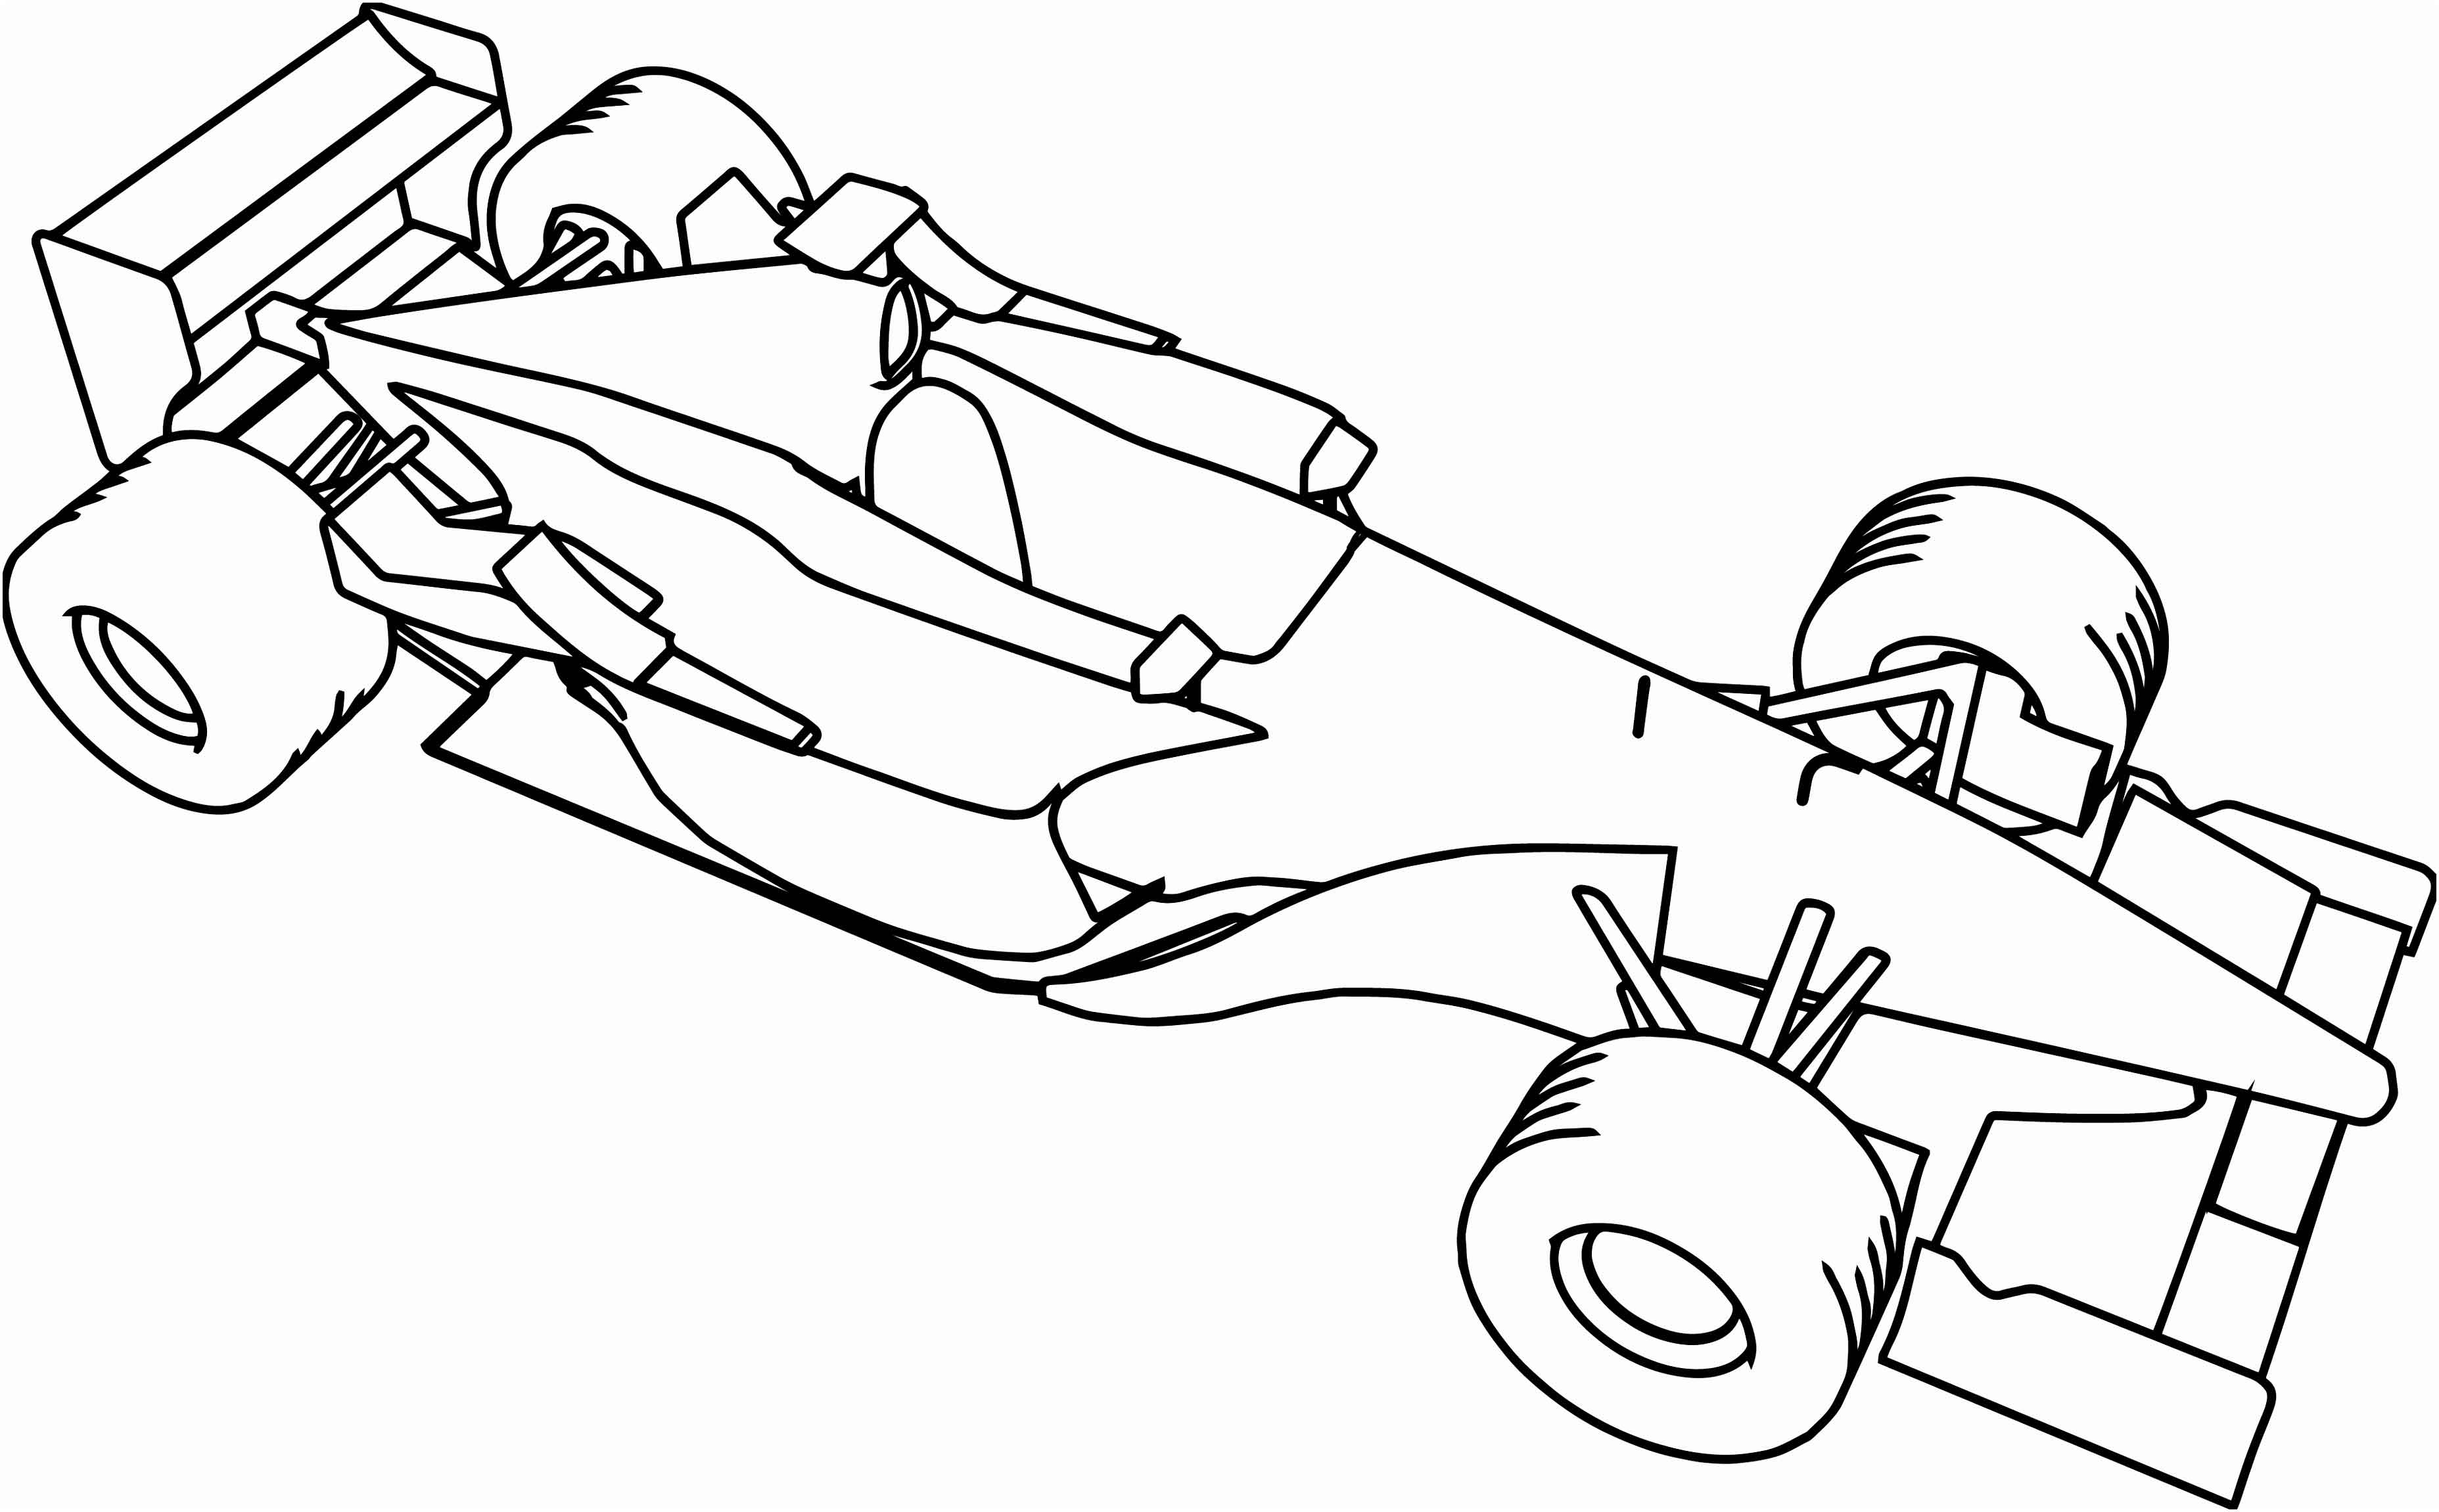 Formula 1 Race Cars Coloring Pages to Print for Adults - Ecolorings.info